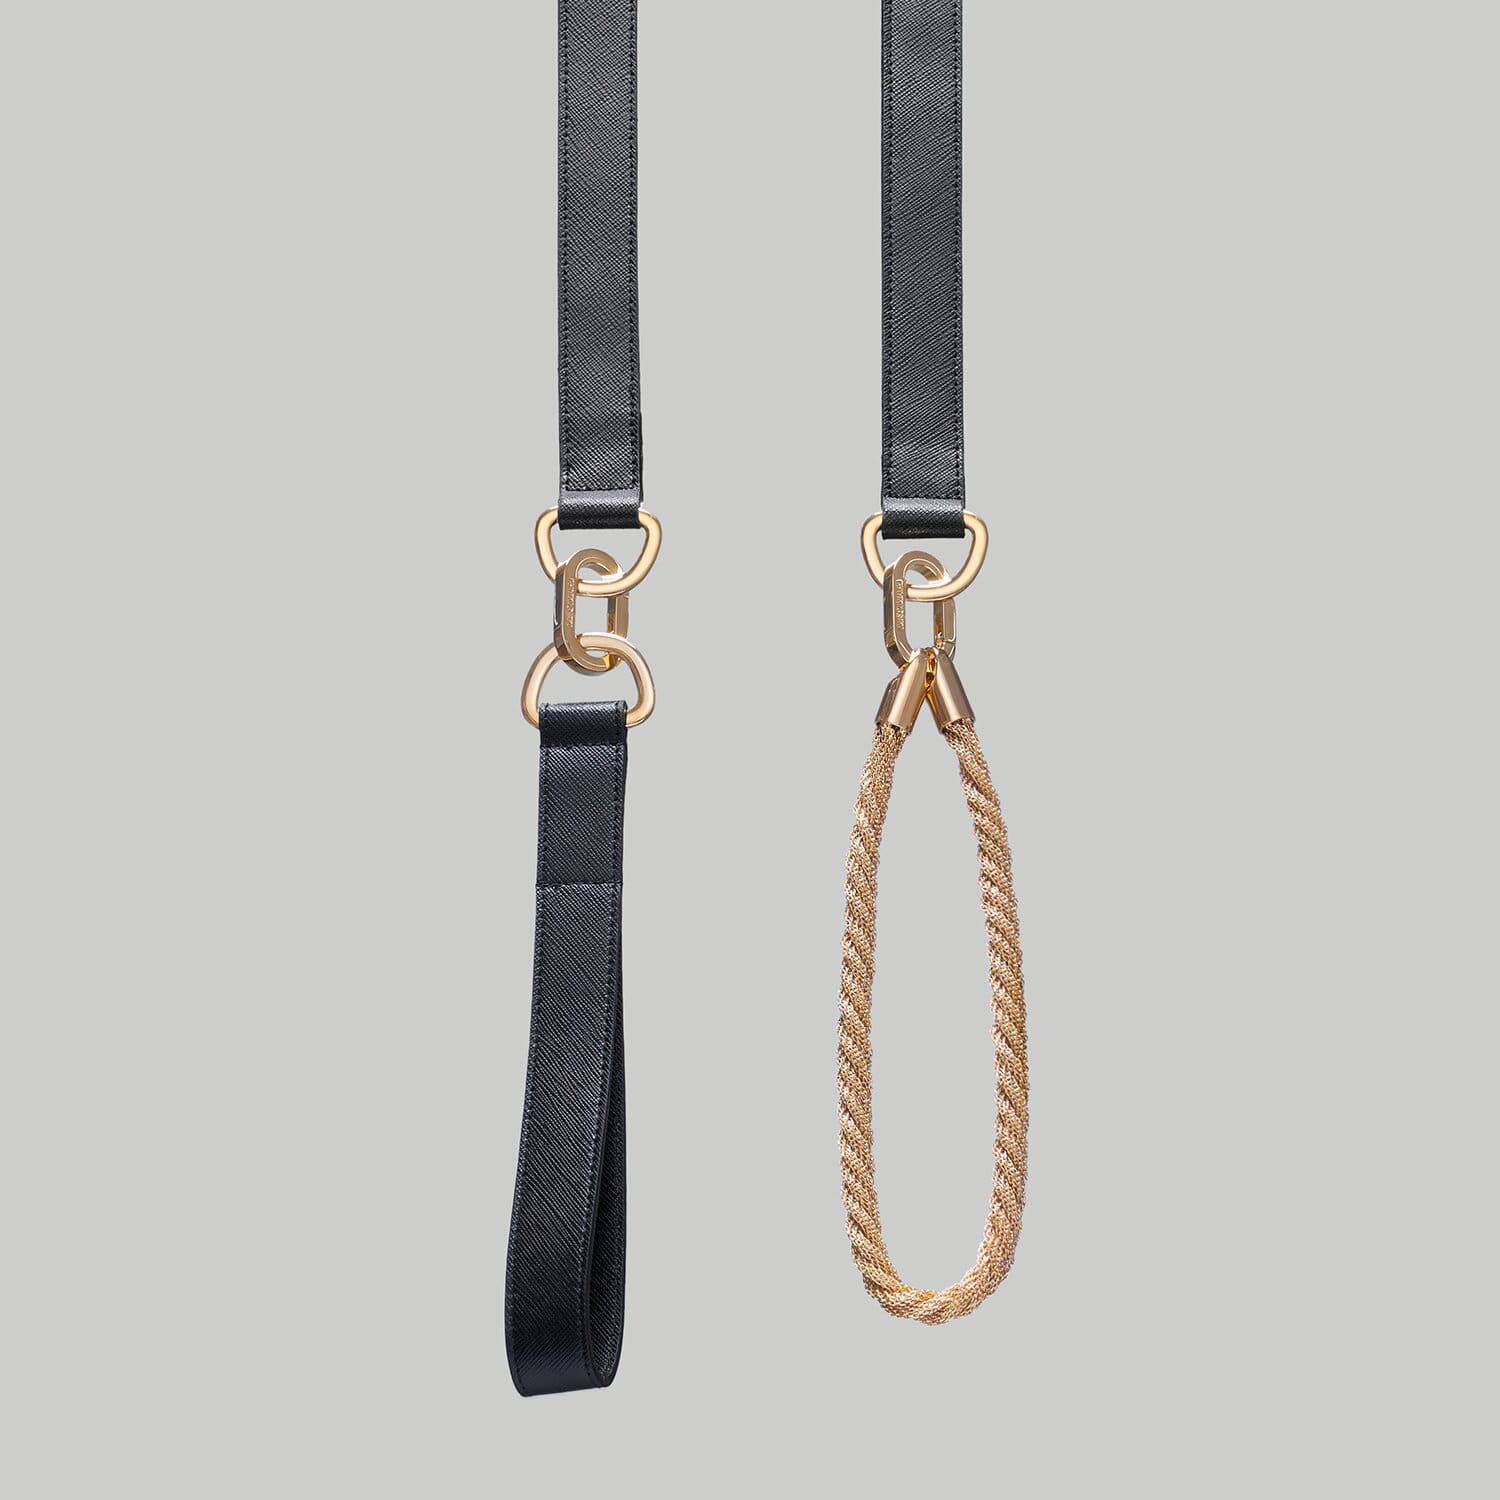 Luxury dog leash in black Saffiano leather with Gold